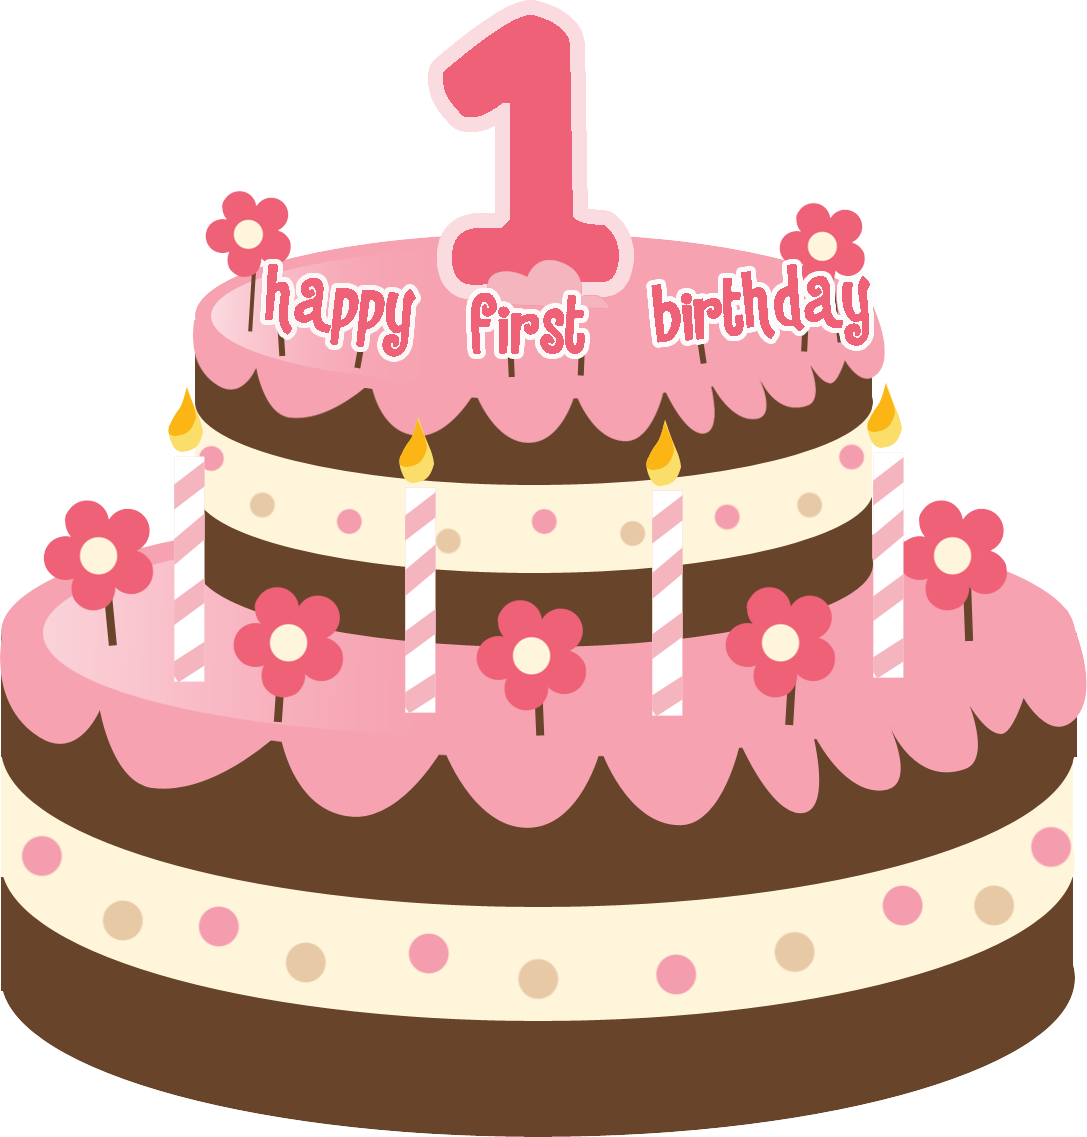 Birthday Cake Clipart PNG Image